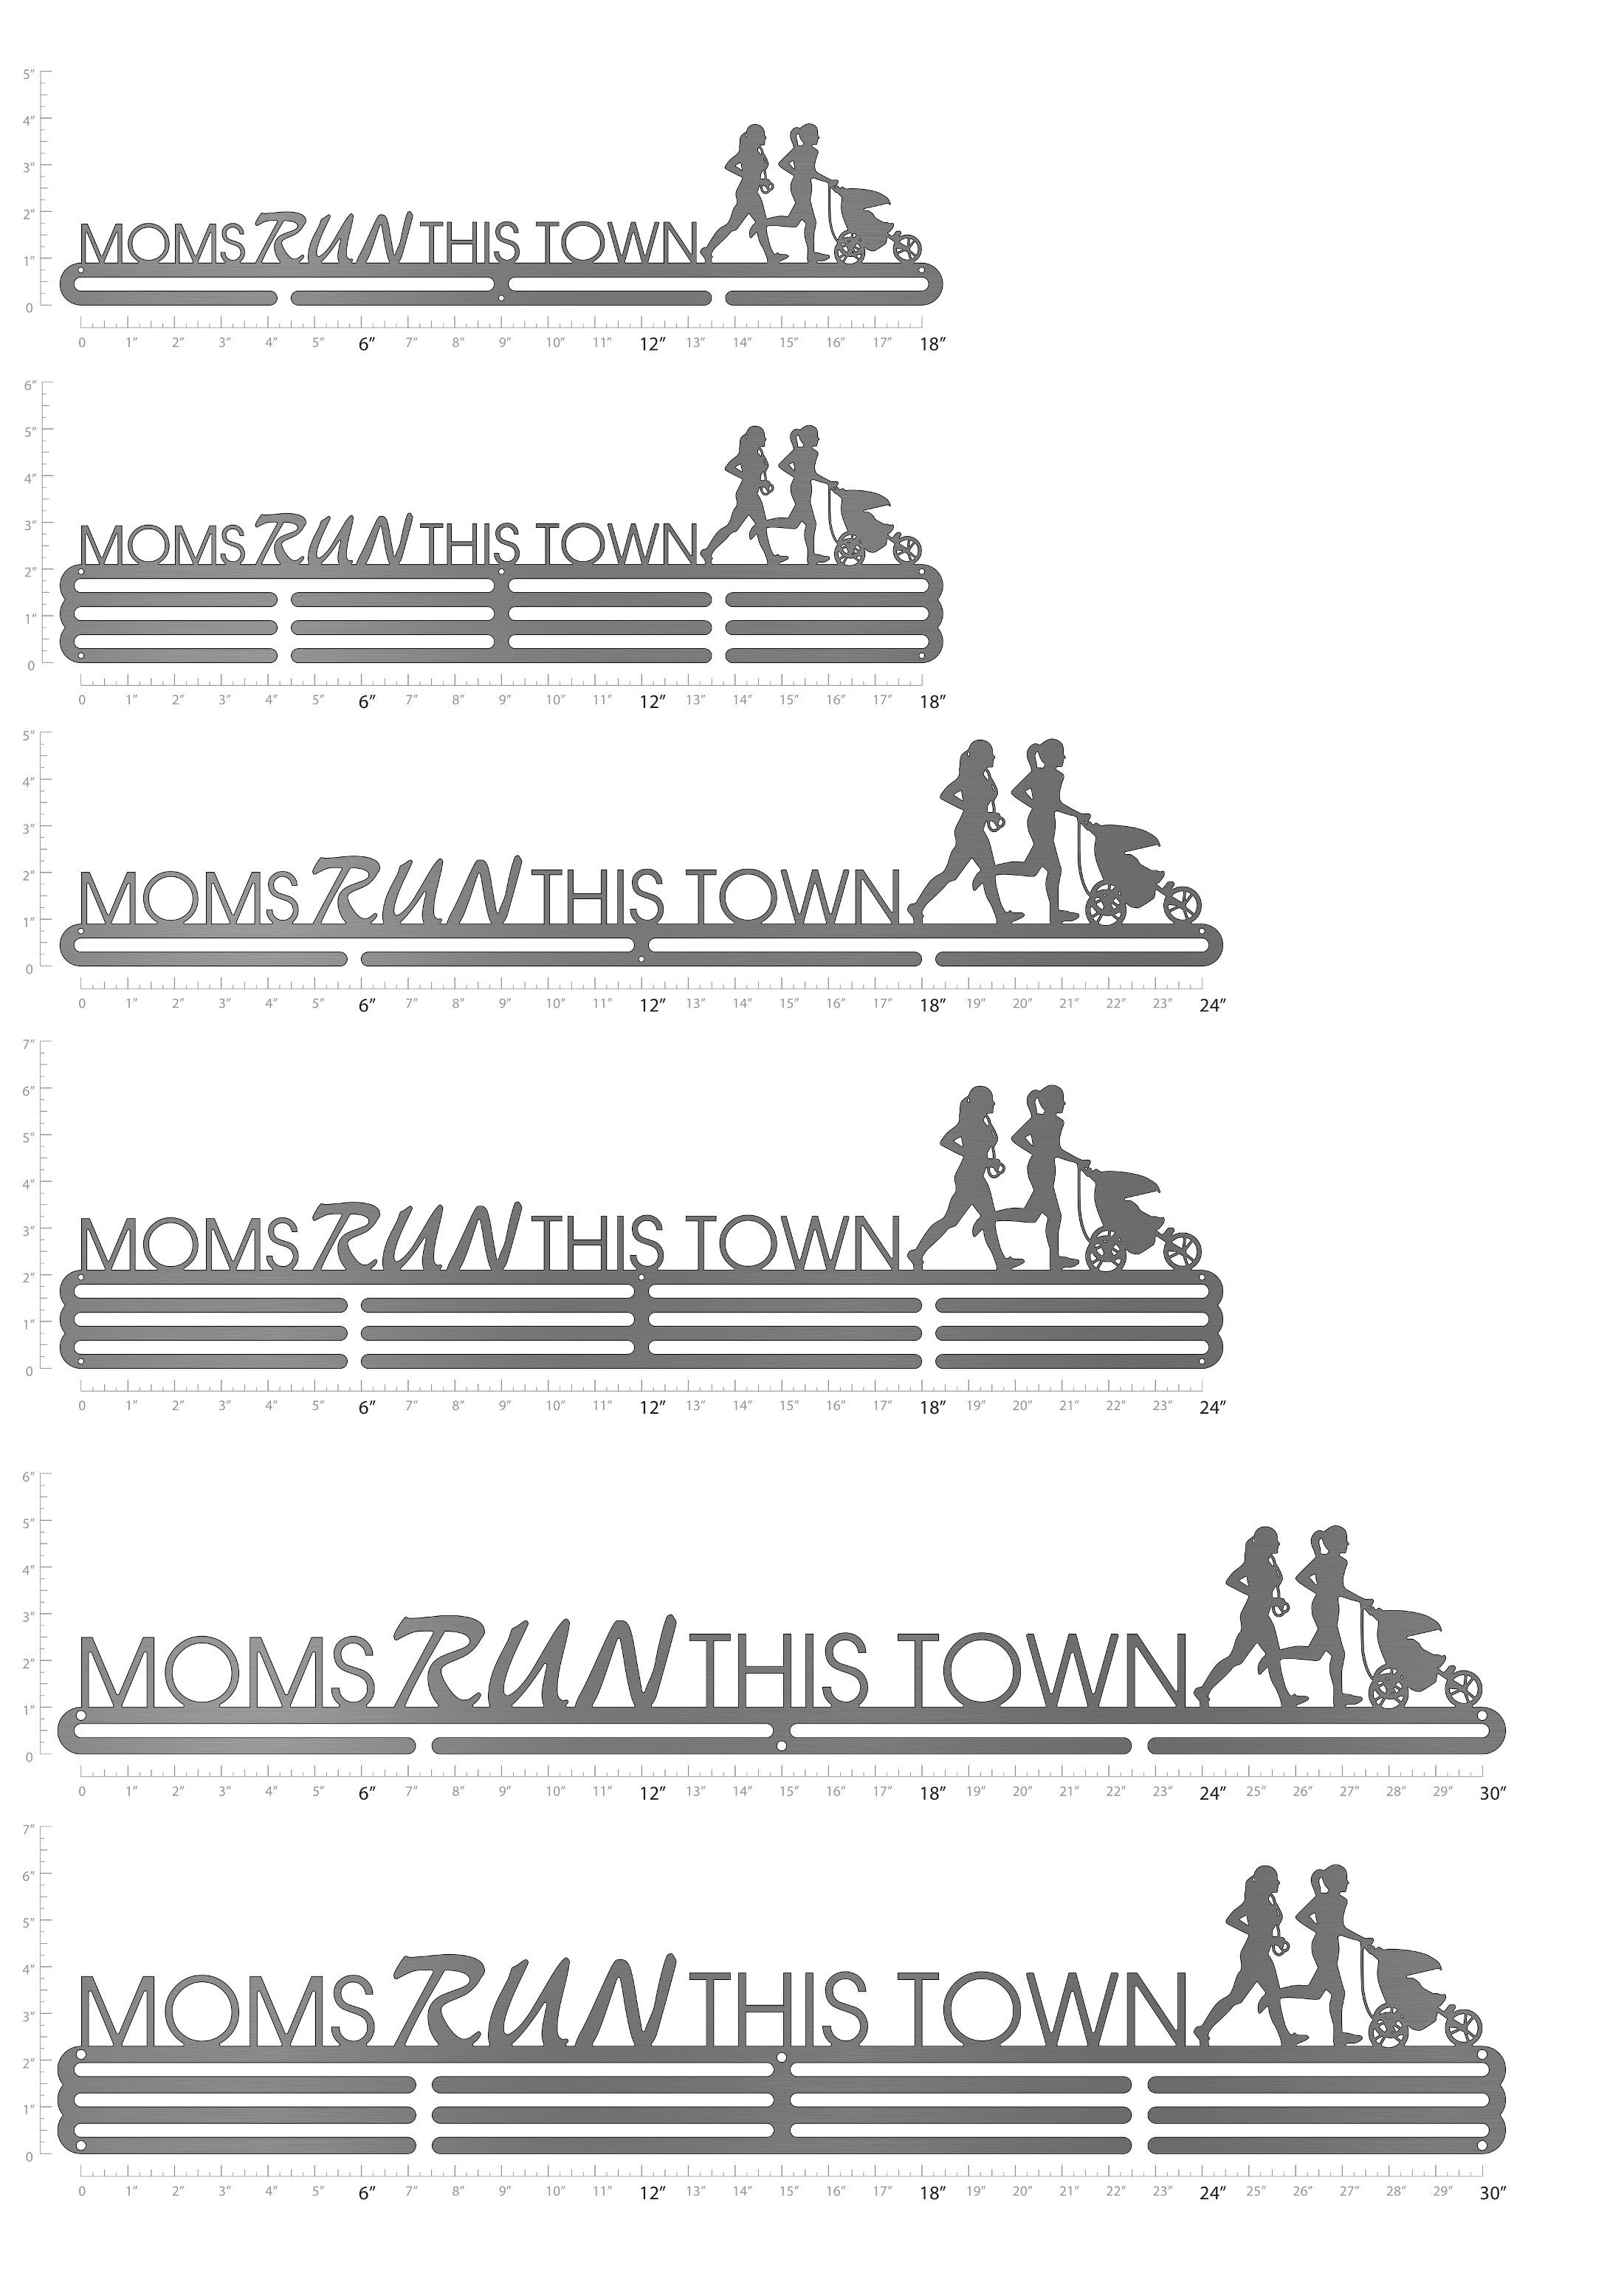 Moms Run This Town - 2 runners w/ stroller - positive letters